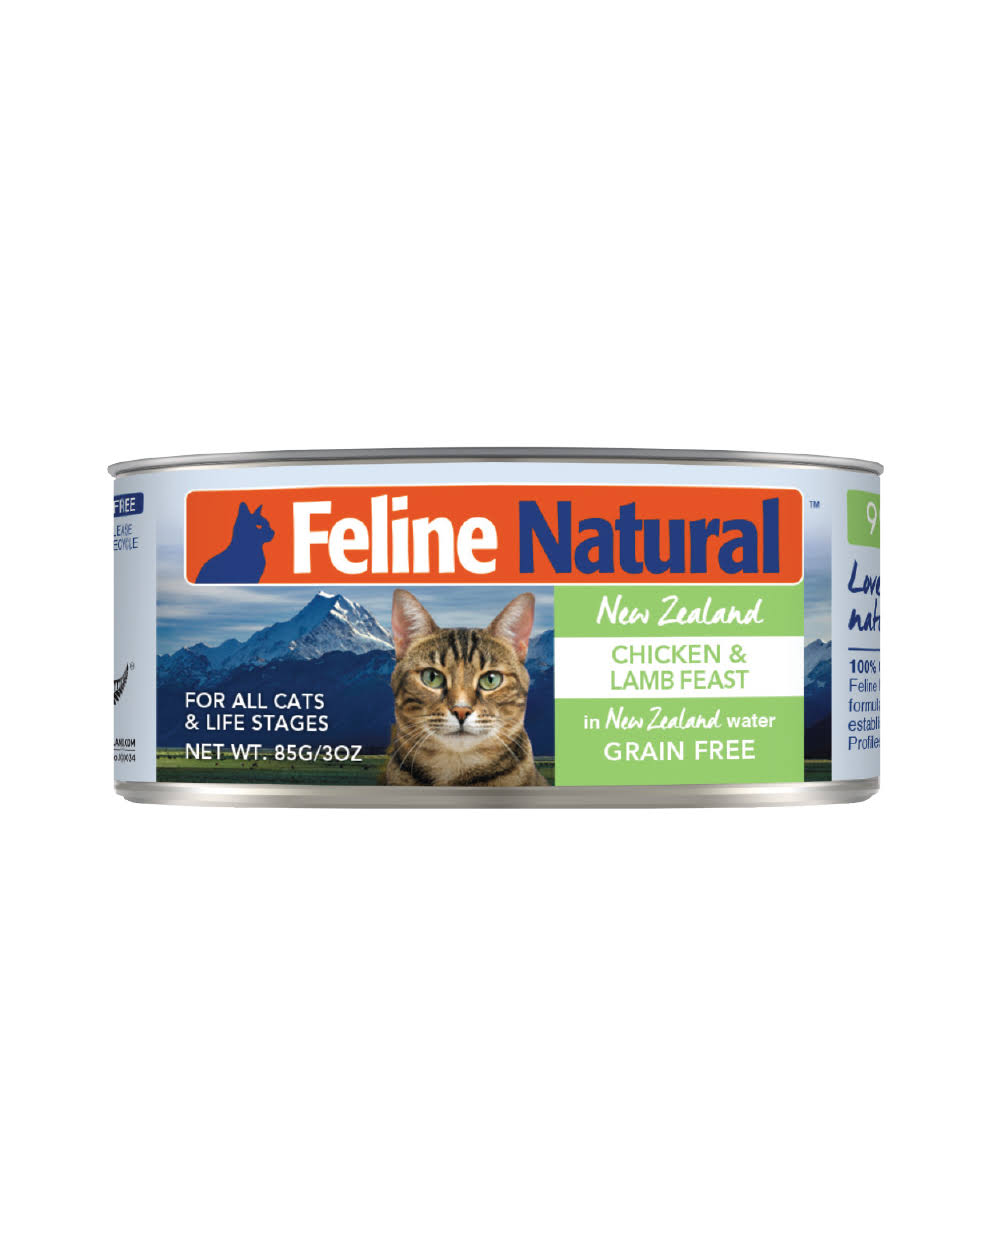 Feline Natural Canned Cat Food - Chicken & Lamb Feast